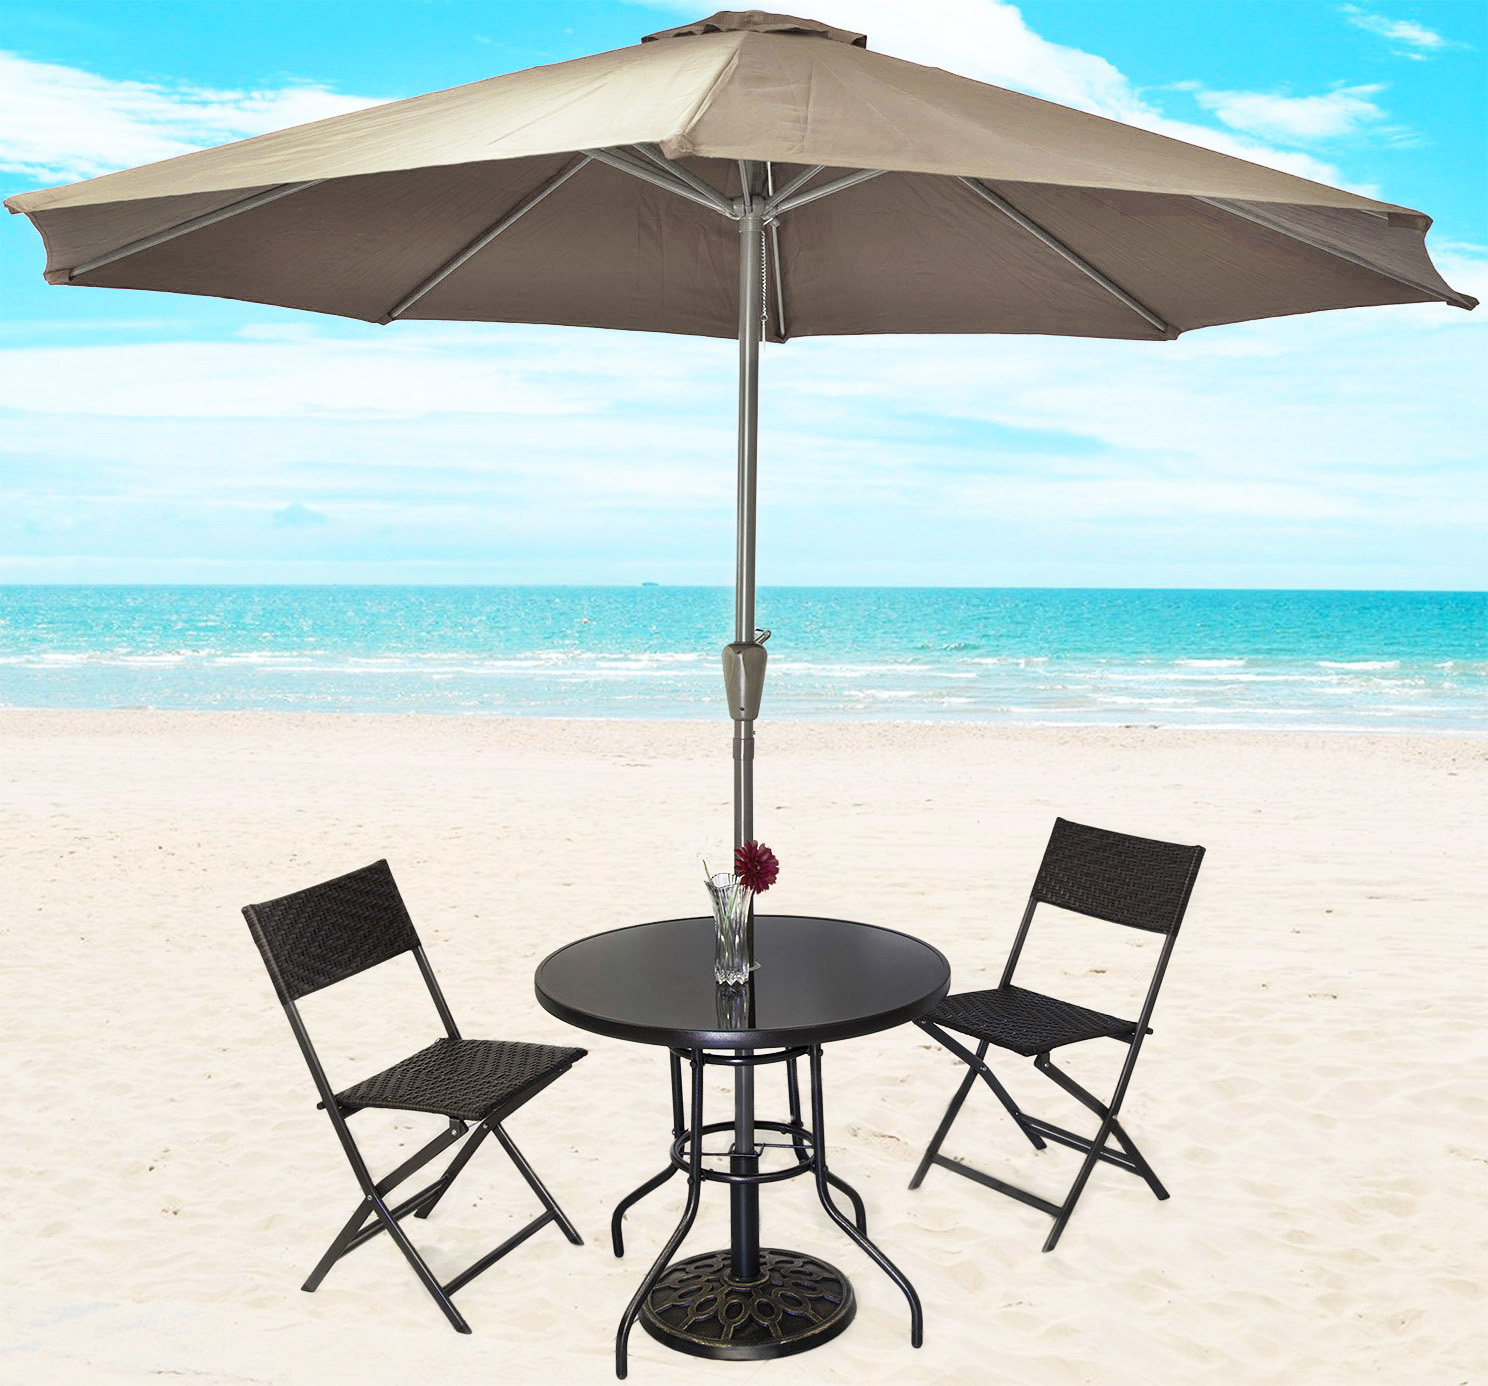 Alfresco 5PC Outdoor Setting (Beige Umbrella & Stand, 2 Rattan Chairs, Round Table)